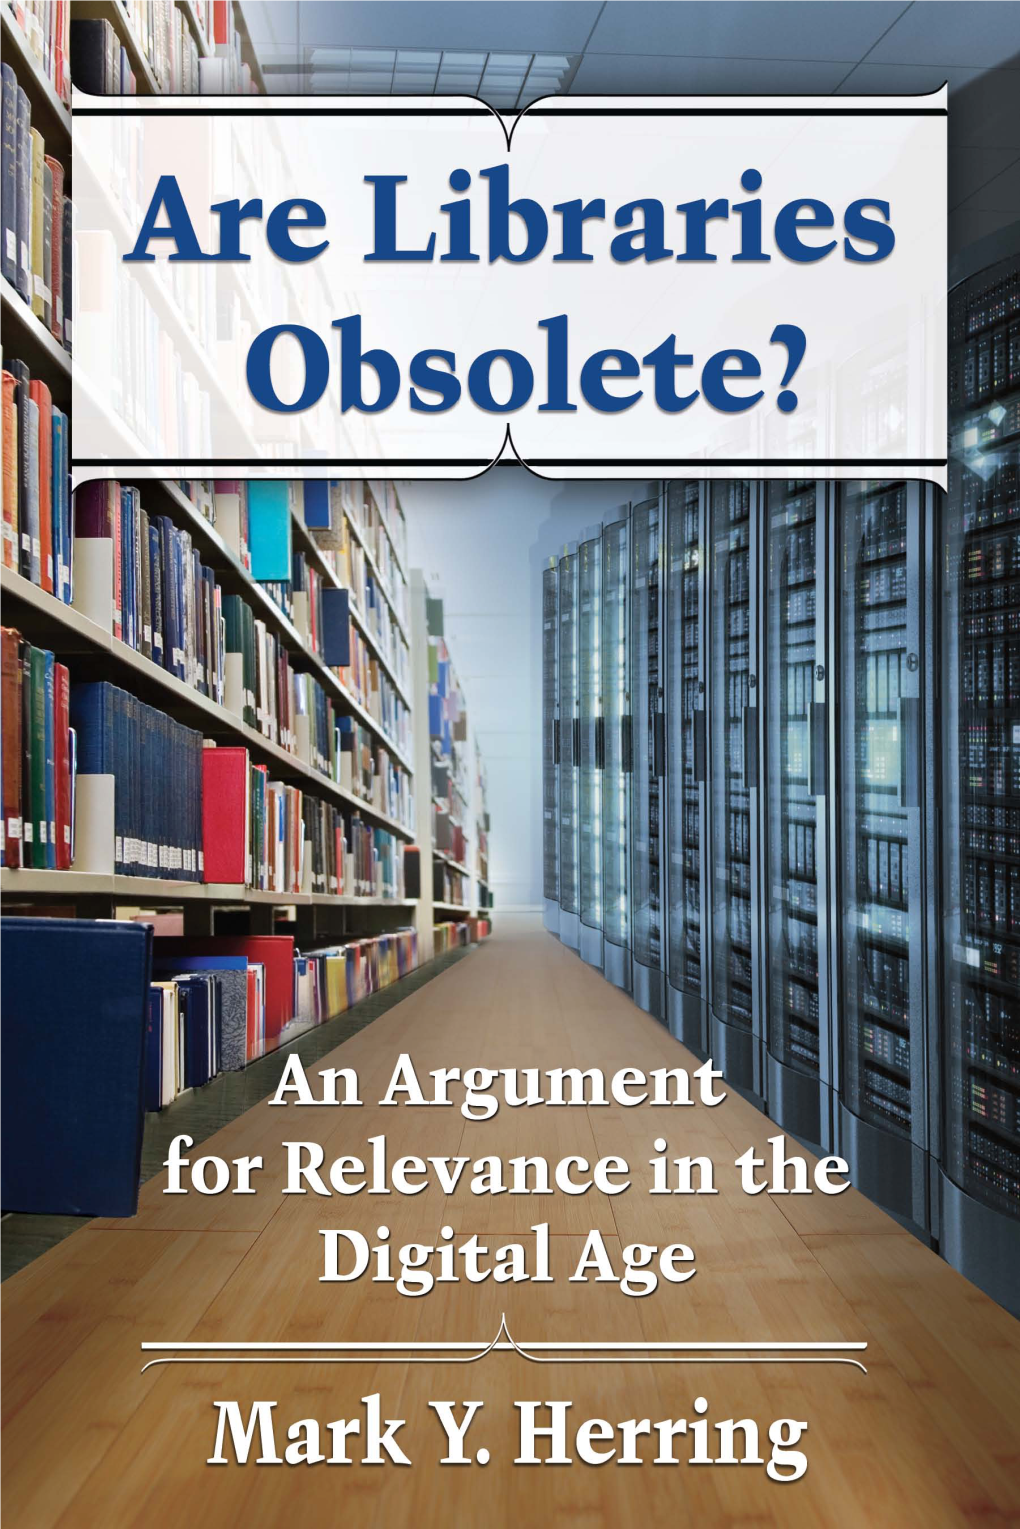 Are Libraries Obsolete? ALSO by MARK Y